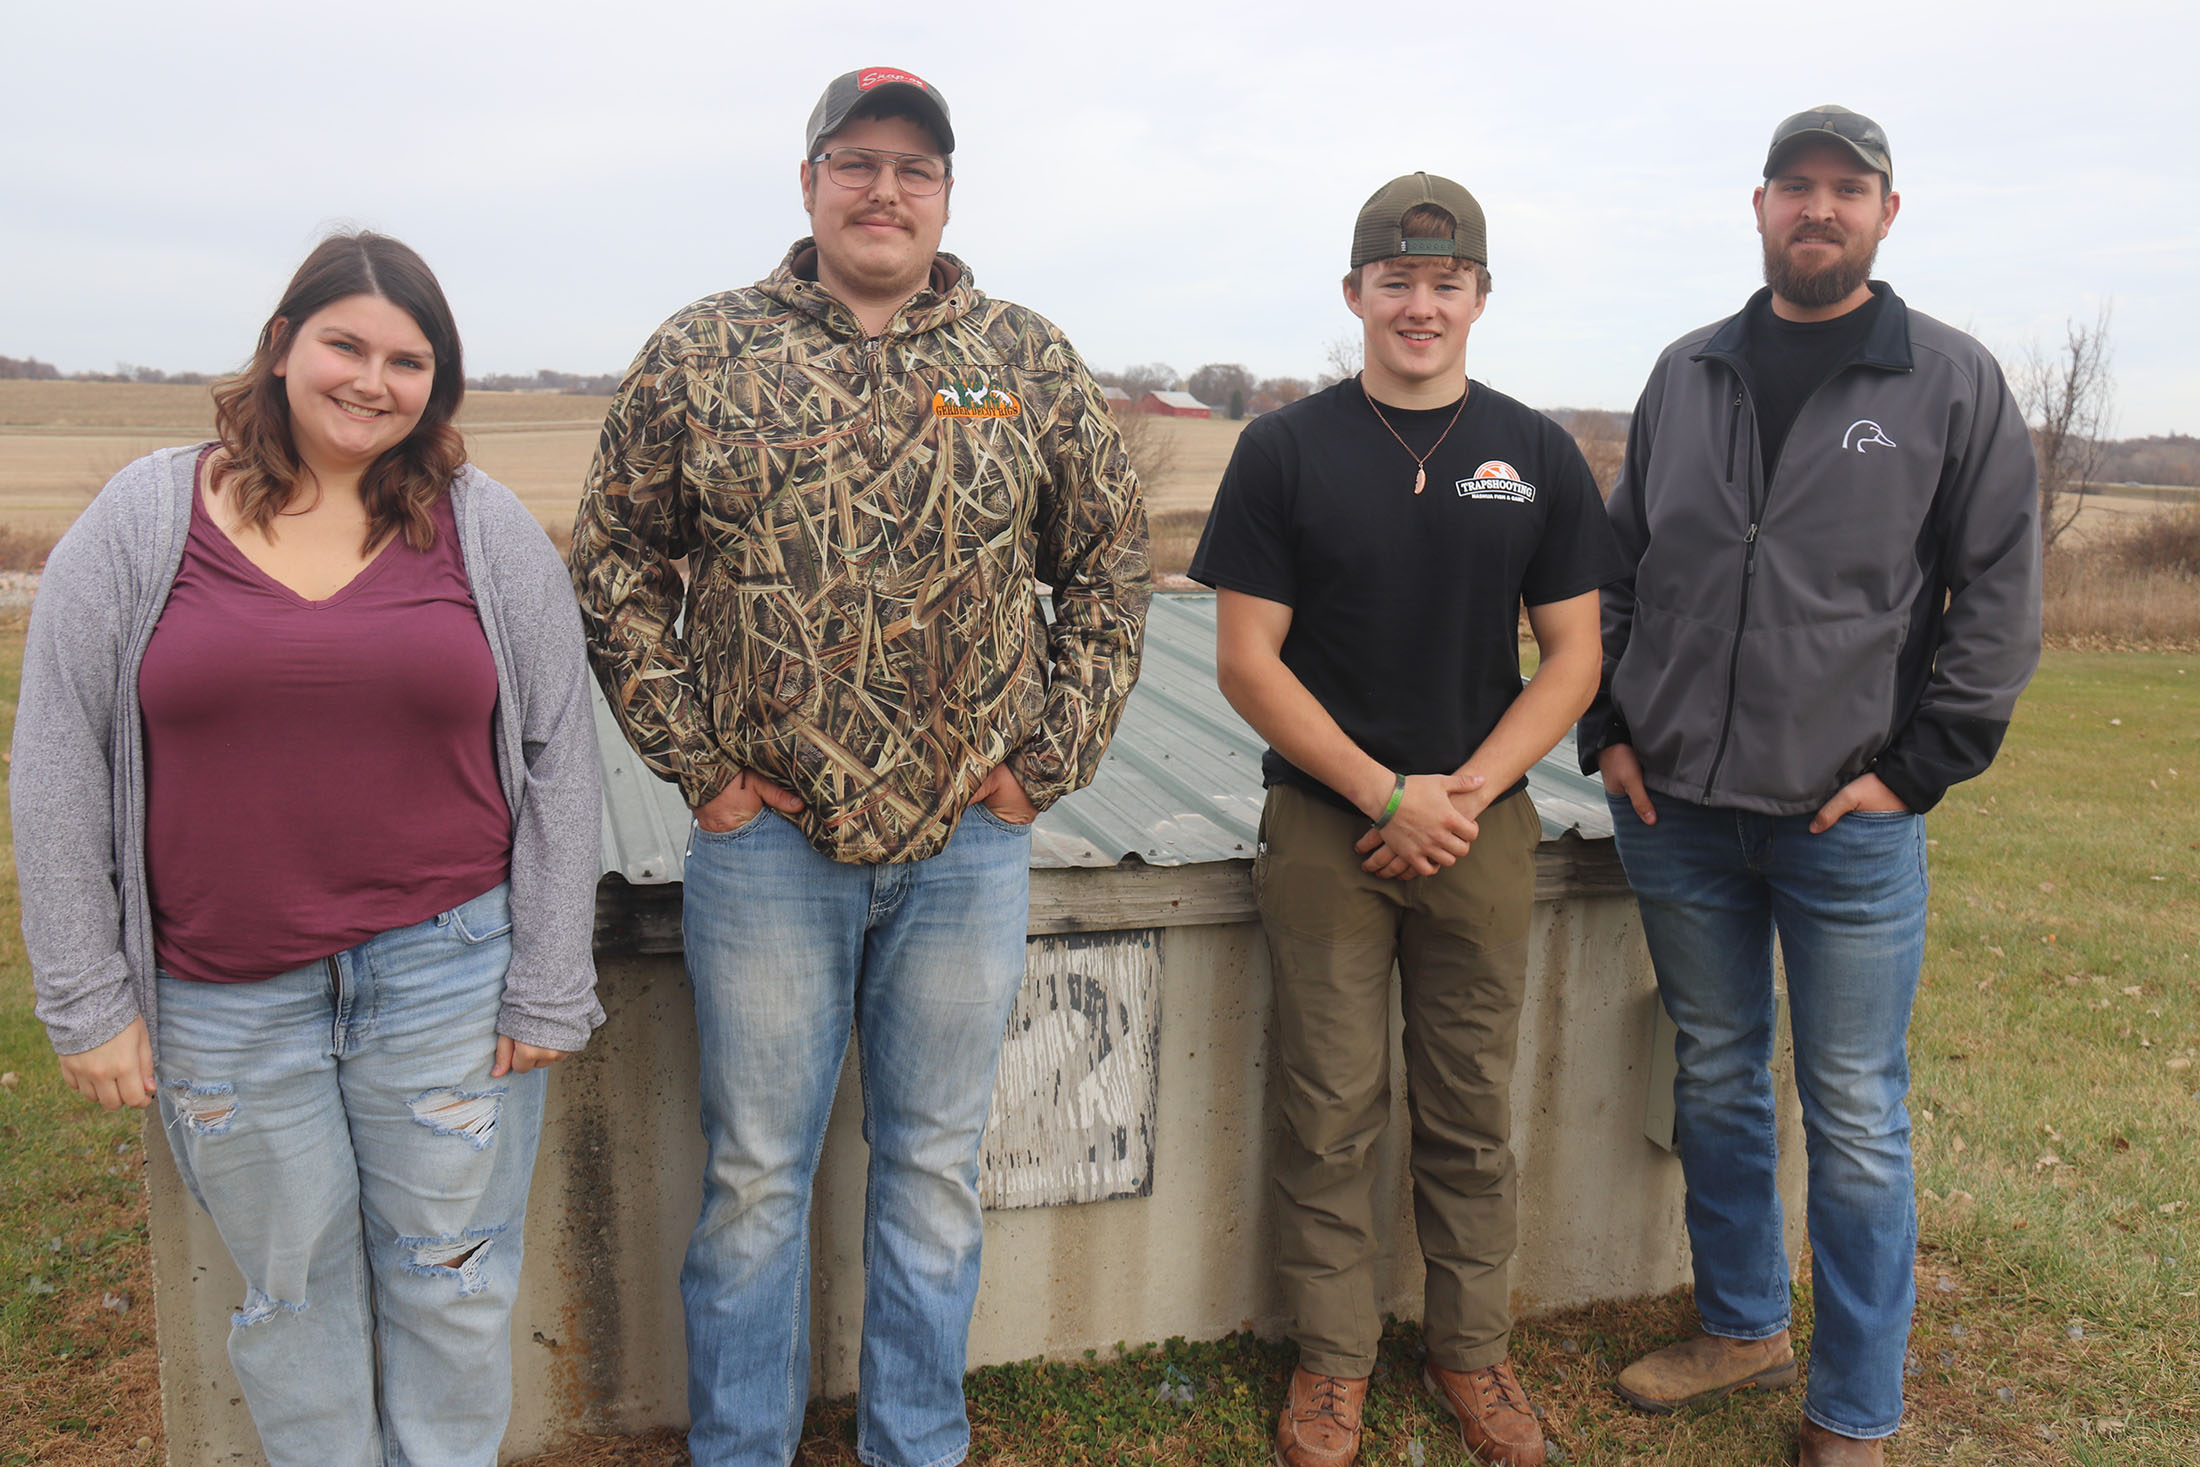 Charles City trap shooting state champs remain active in sport